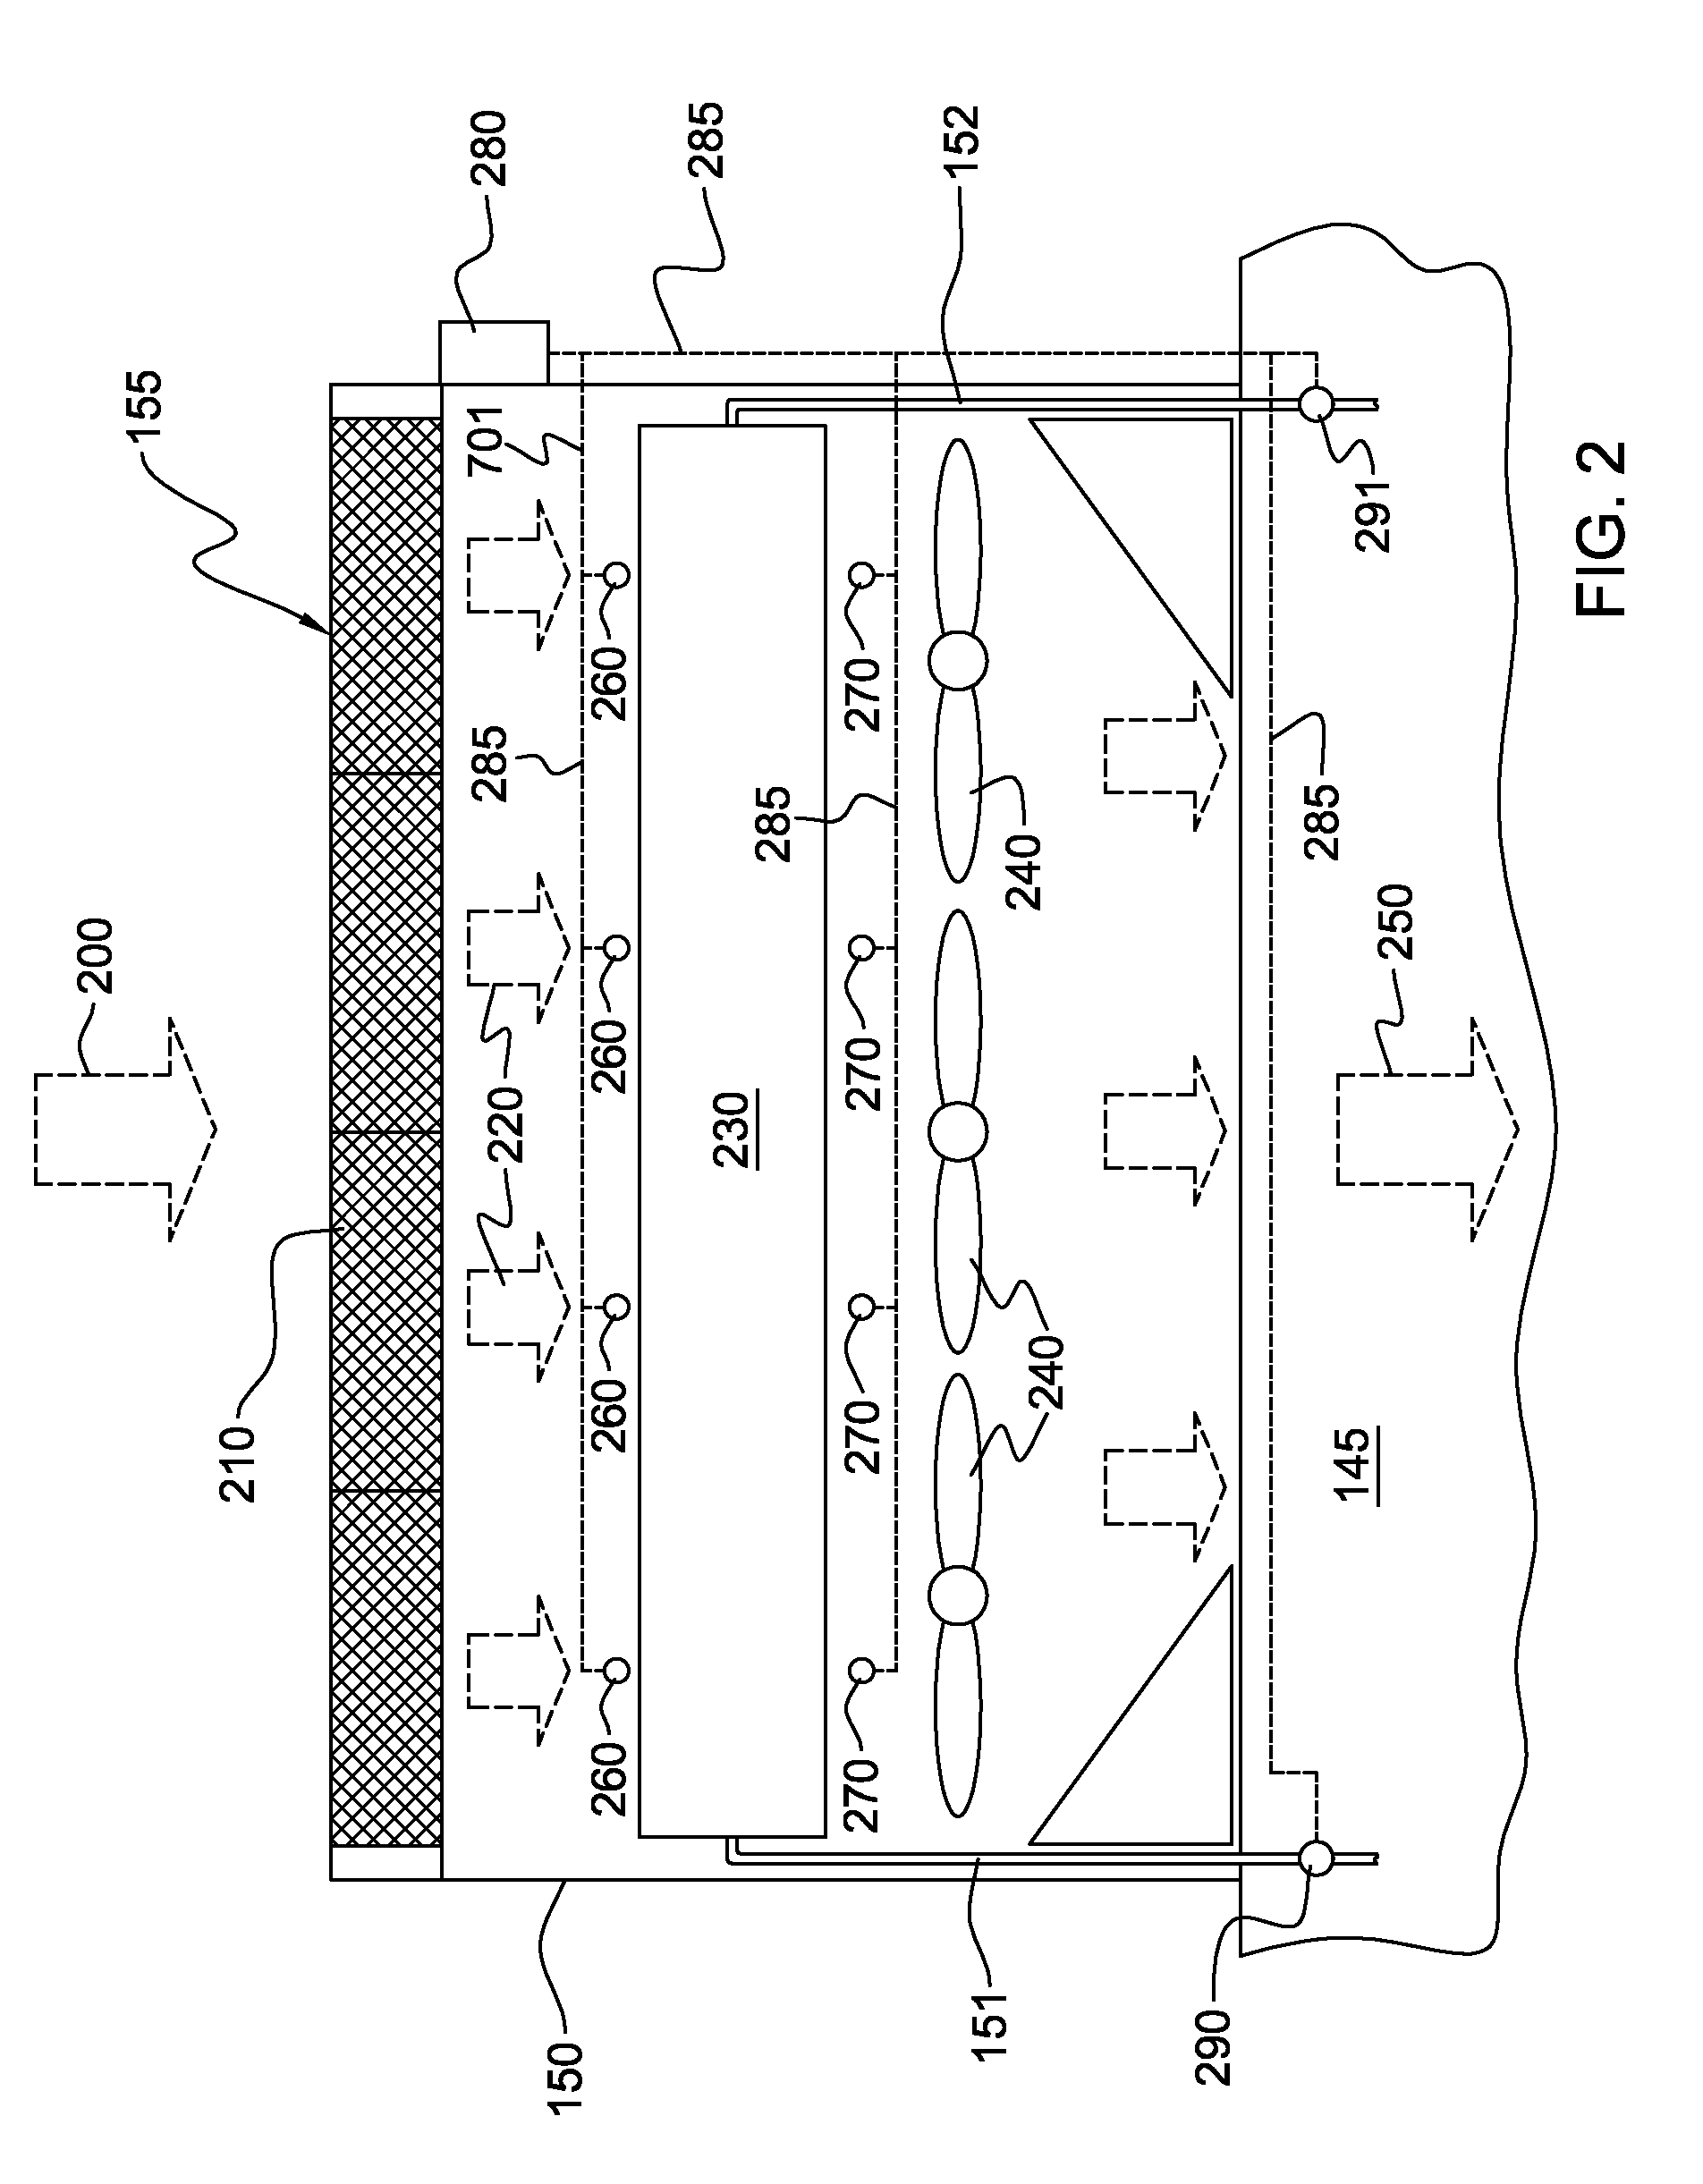 Temperature-based monitoring method and system for determining first and second fluid flow rates through a heat exchanger